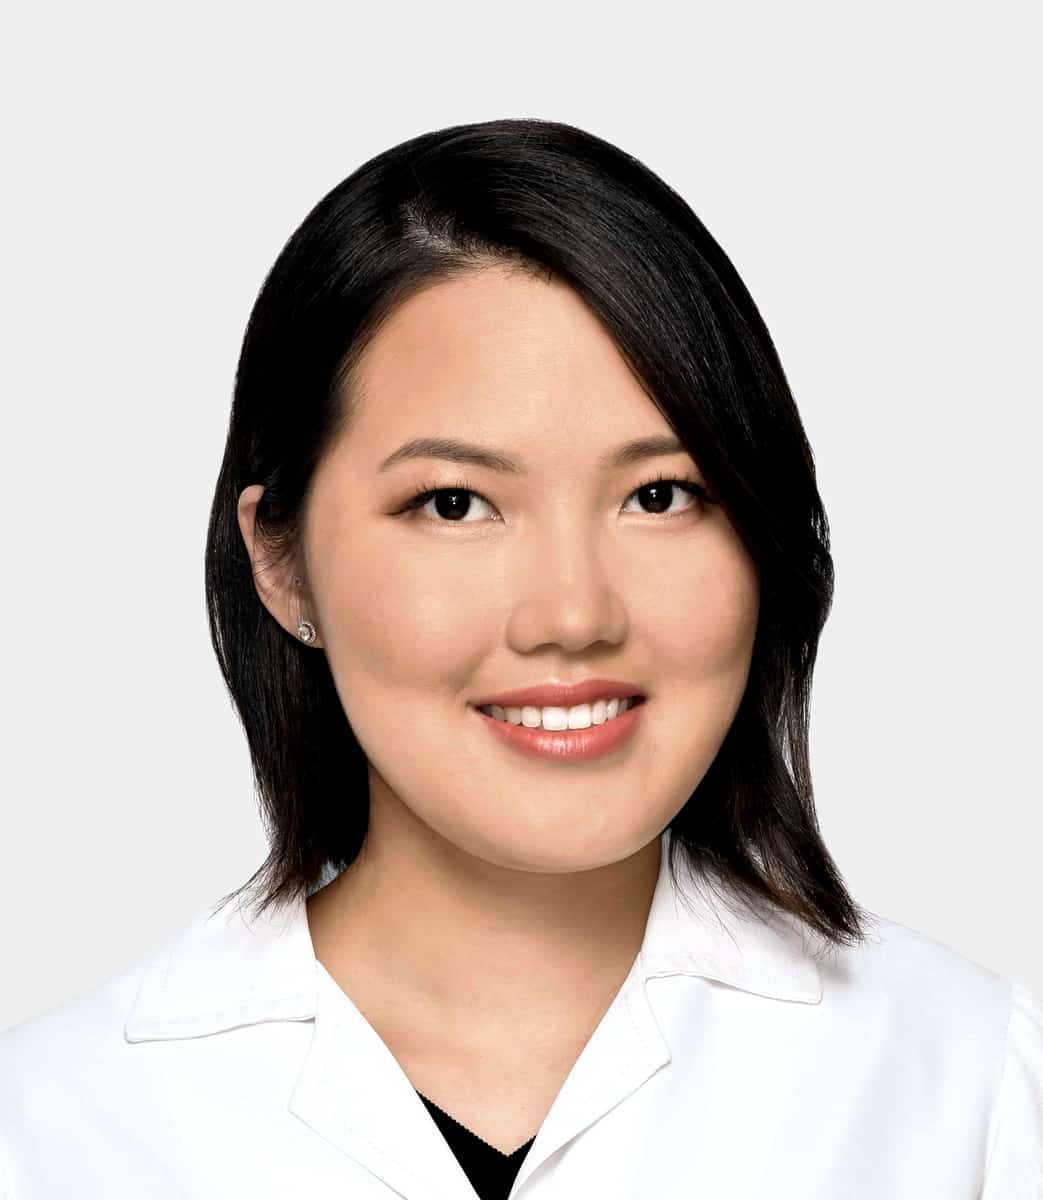 dr. ha young kim - toronto dentists by downtown dentistry